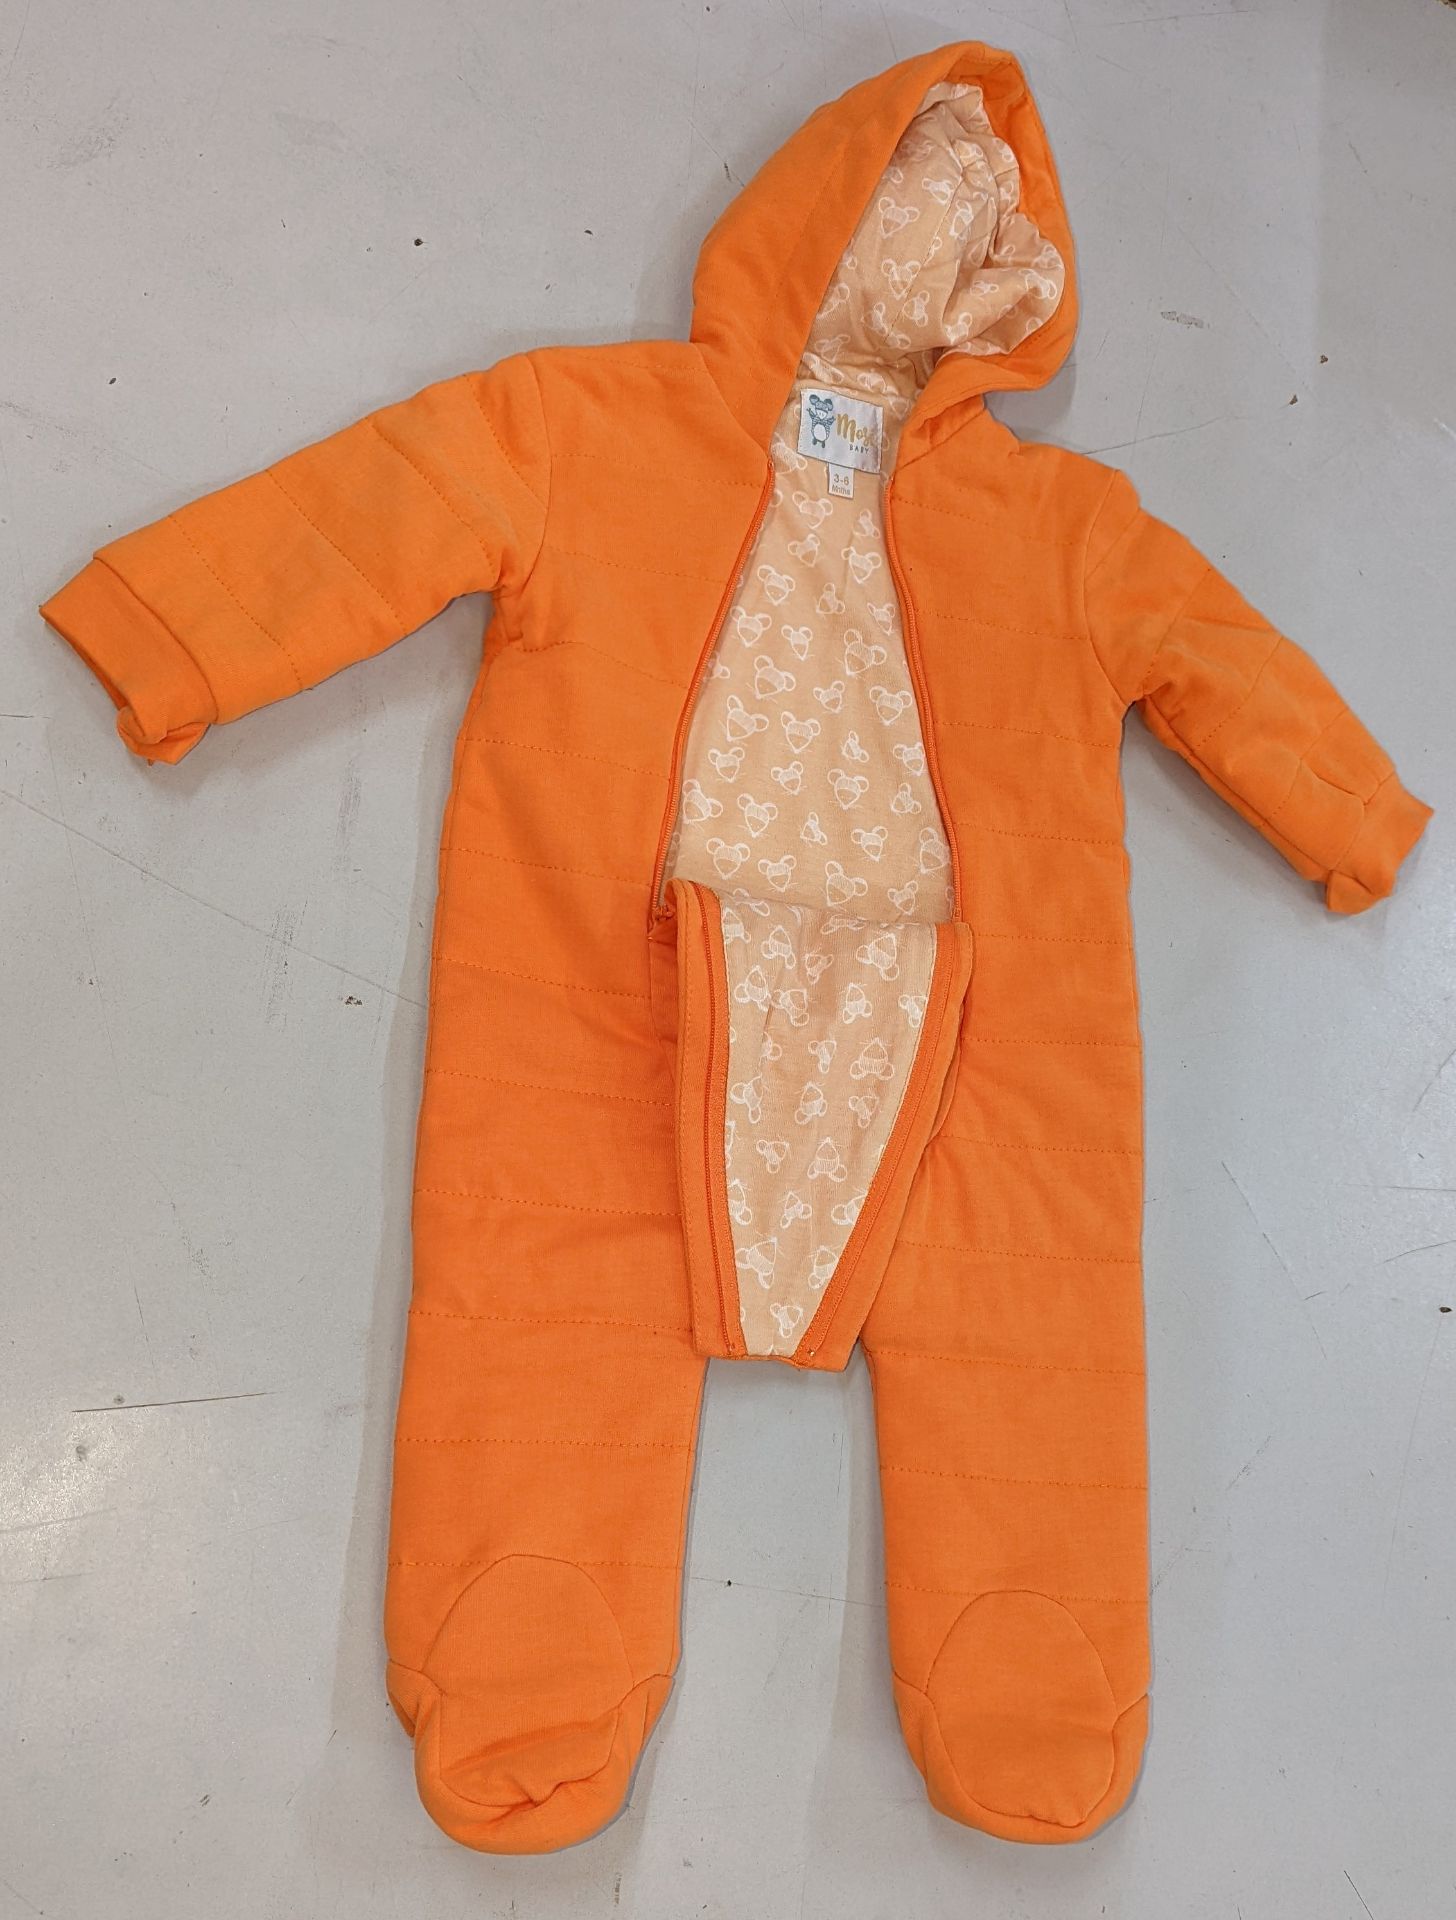 23 off Mosé Baby unisex orange romper body suits, in 100% cotton with Mosé Baby print lining. Age 6 - Image 2 of 11